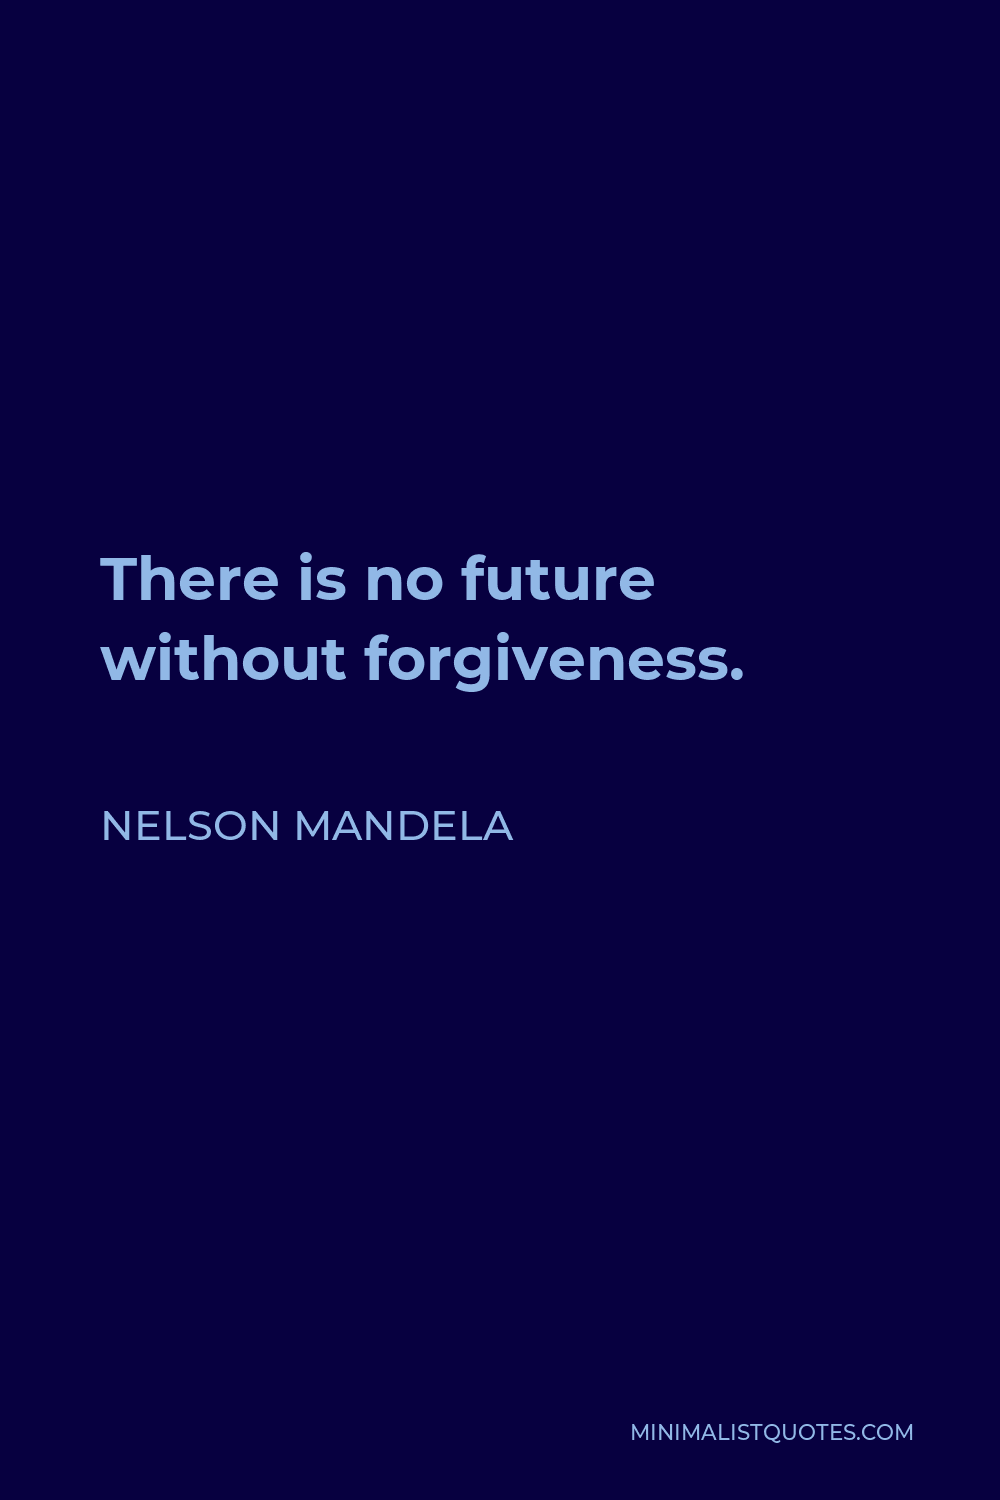 Nelson Mandela Quote - There is no future without forgiveness.